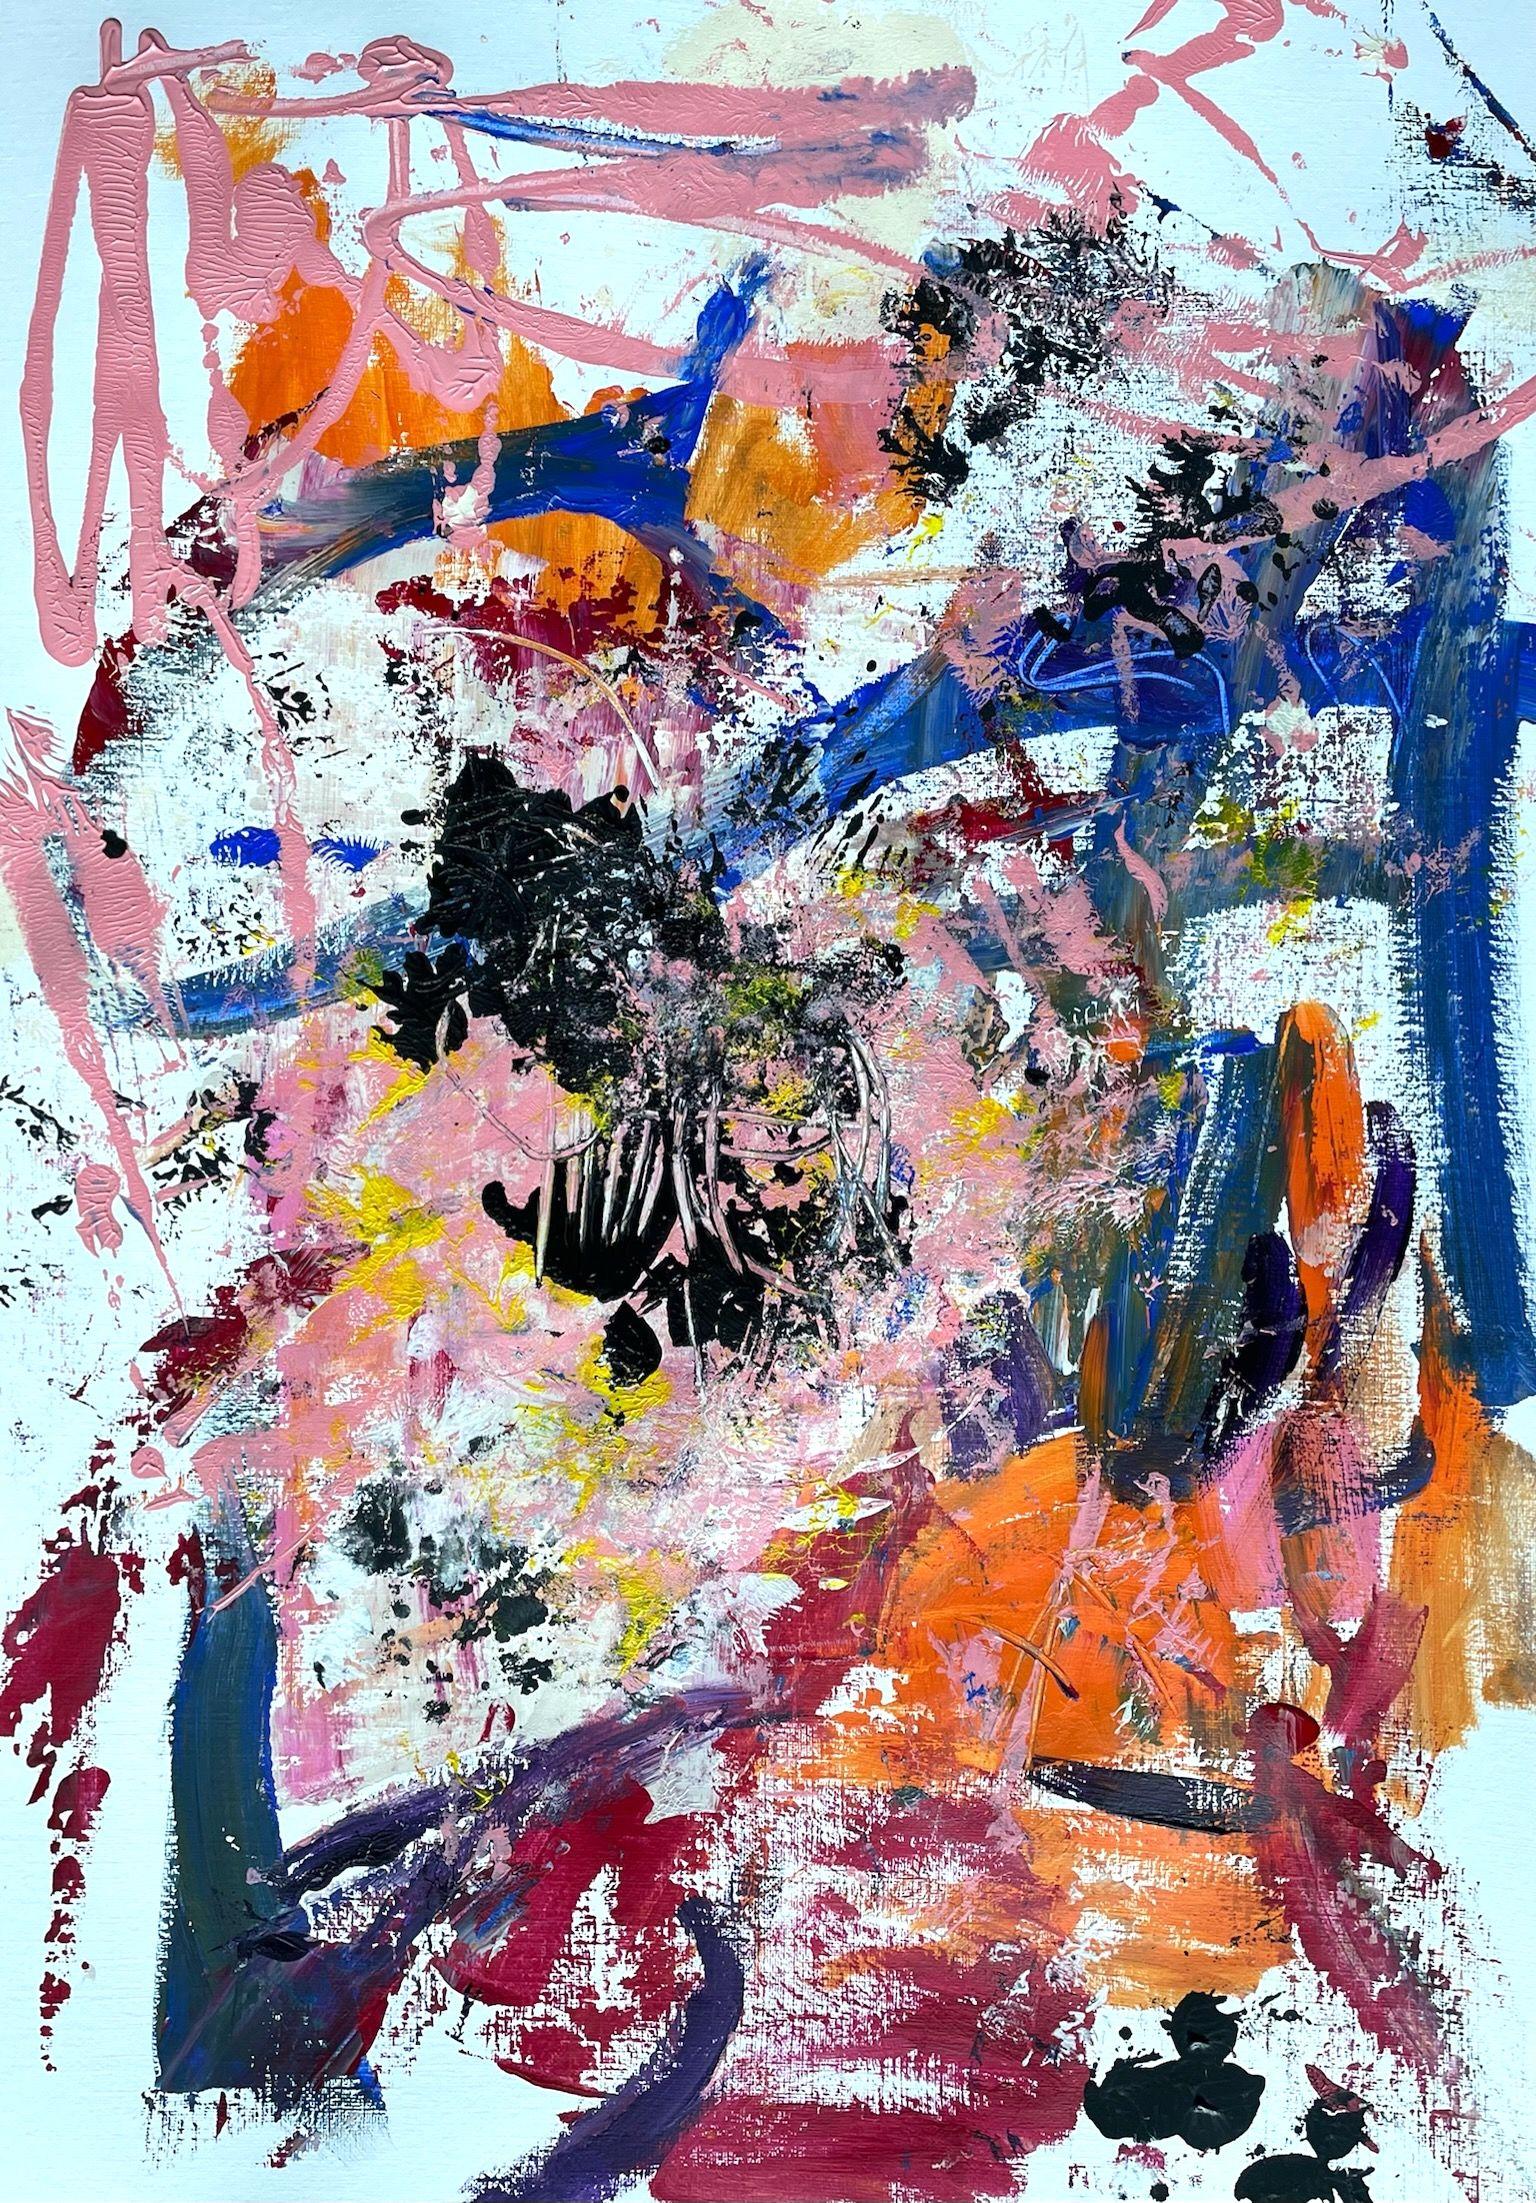 "Catching Up" is an abstract modern acrylic painting on paper. It is painted expressively and gestural-dynamically. The main colors are blue, orange, pink and black. The artwork is full of movement and vibrancy.    The painting is signed on the